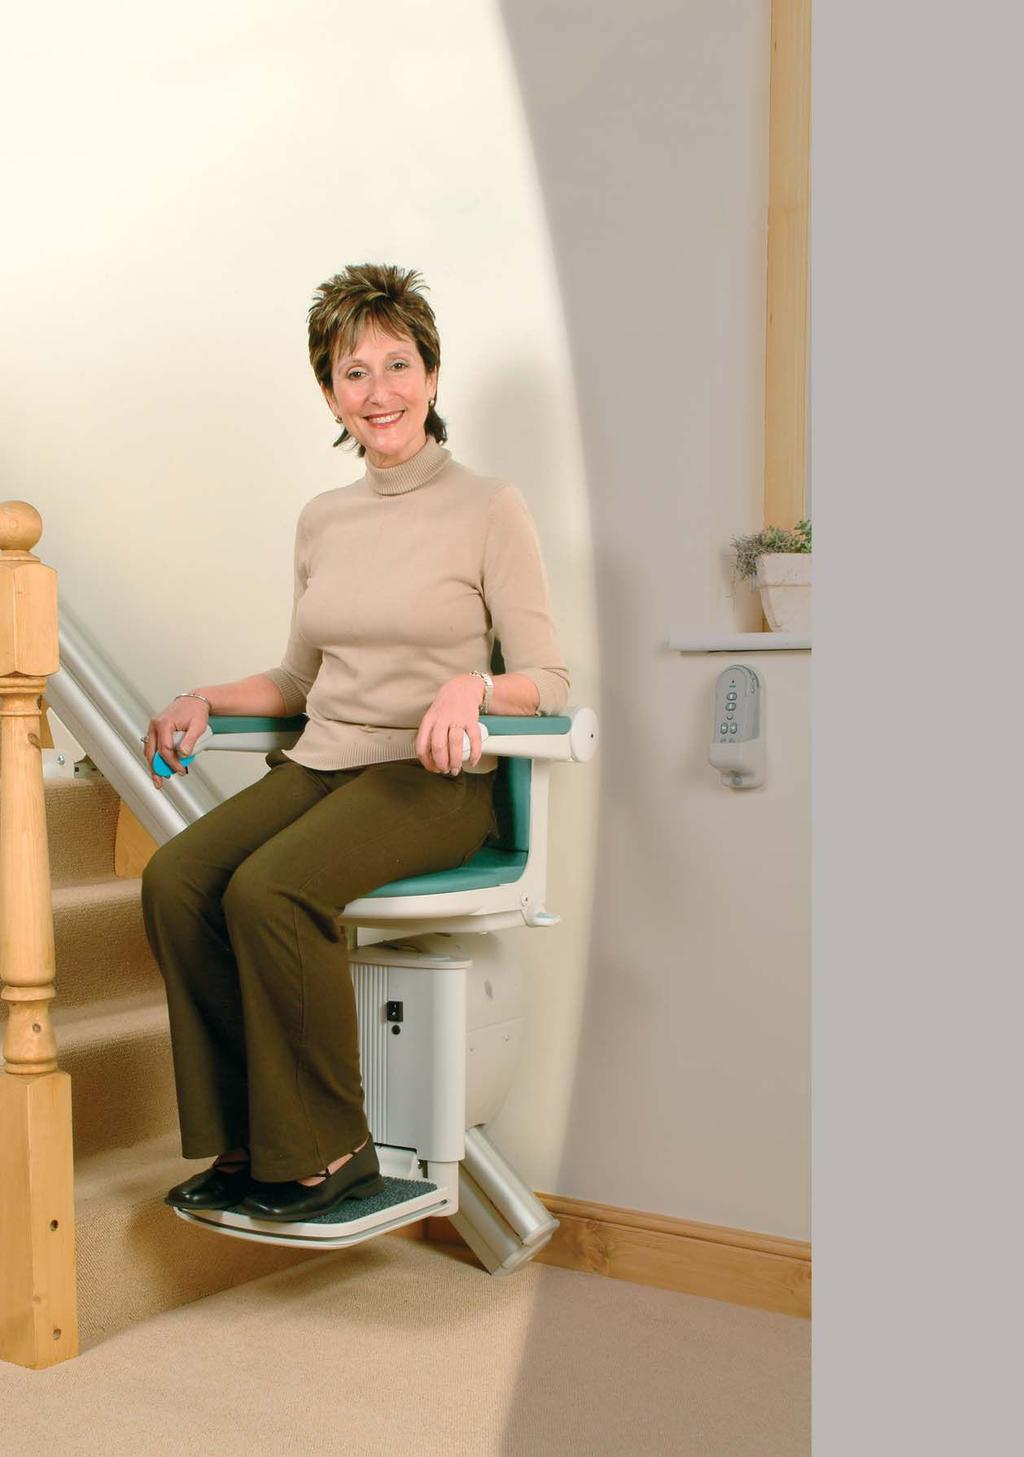 Discover the Standard SpaceSaver Perch benefits of a Minivator stairlift Designed with users in mind, the Minivator 1000 straight